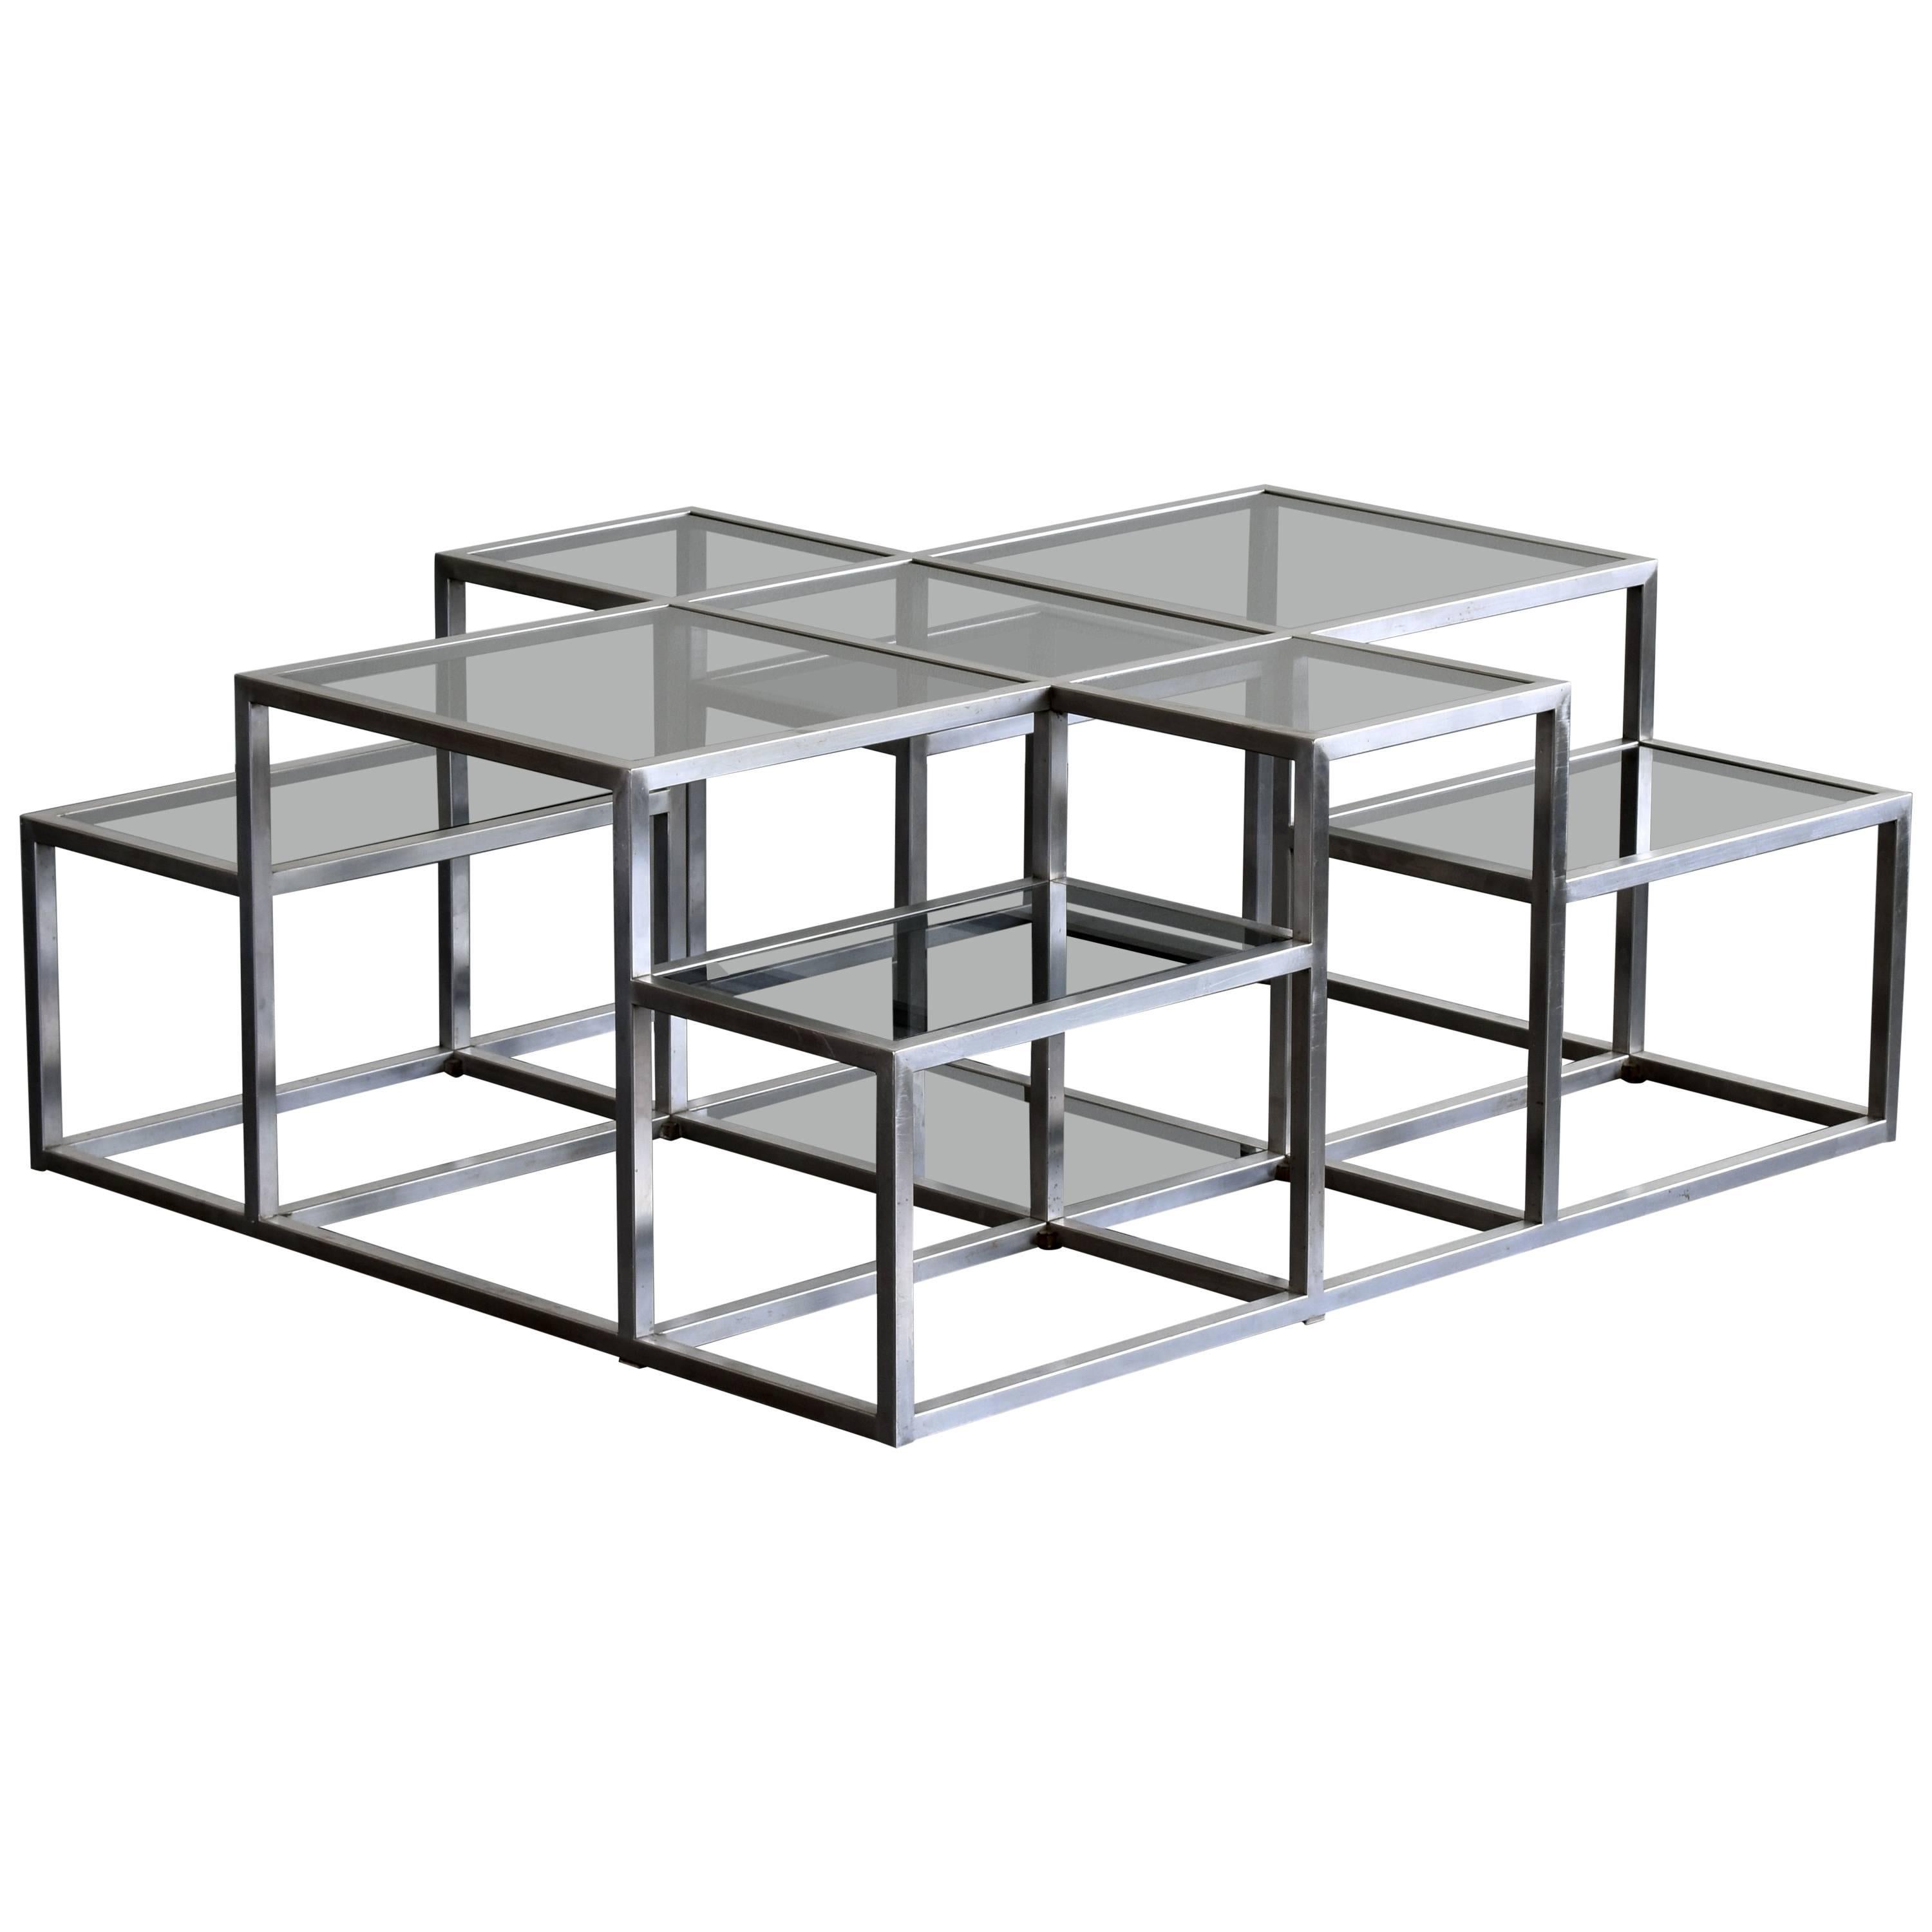 Michel Boyer, Rare Minimal Coffee Table in Stainless Steel and Smoked Glass 1973